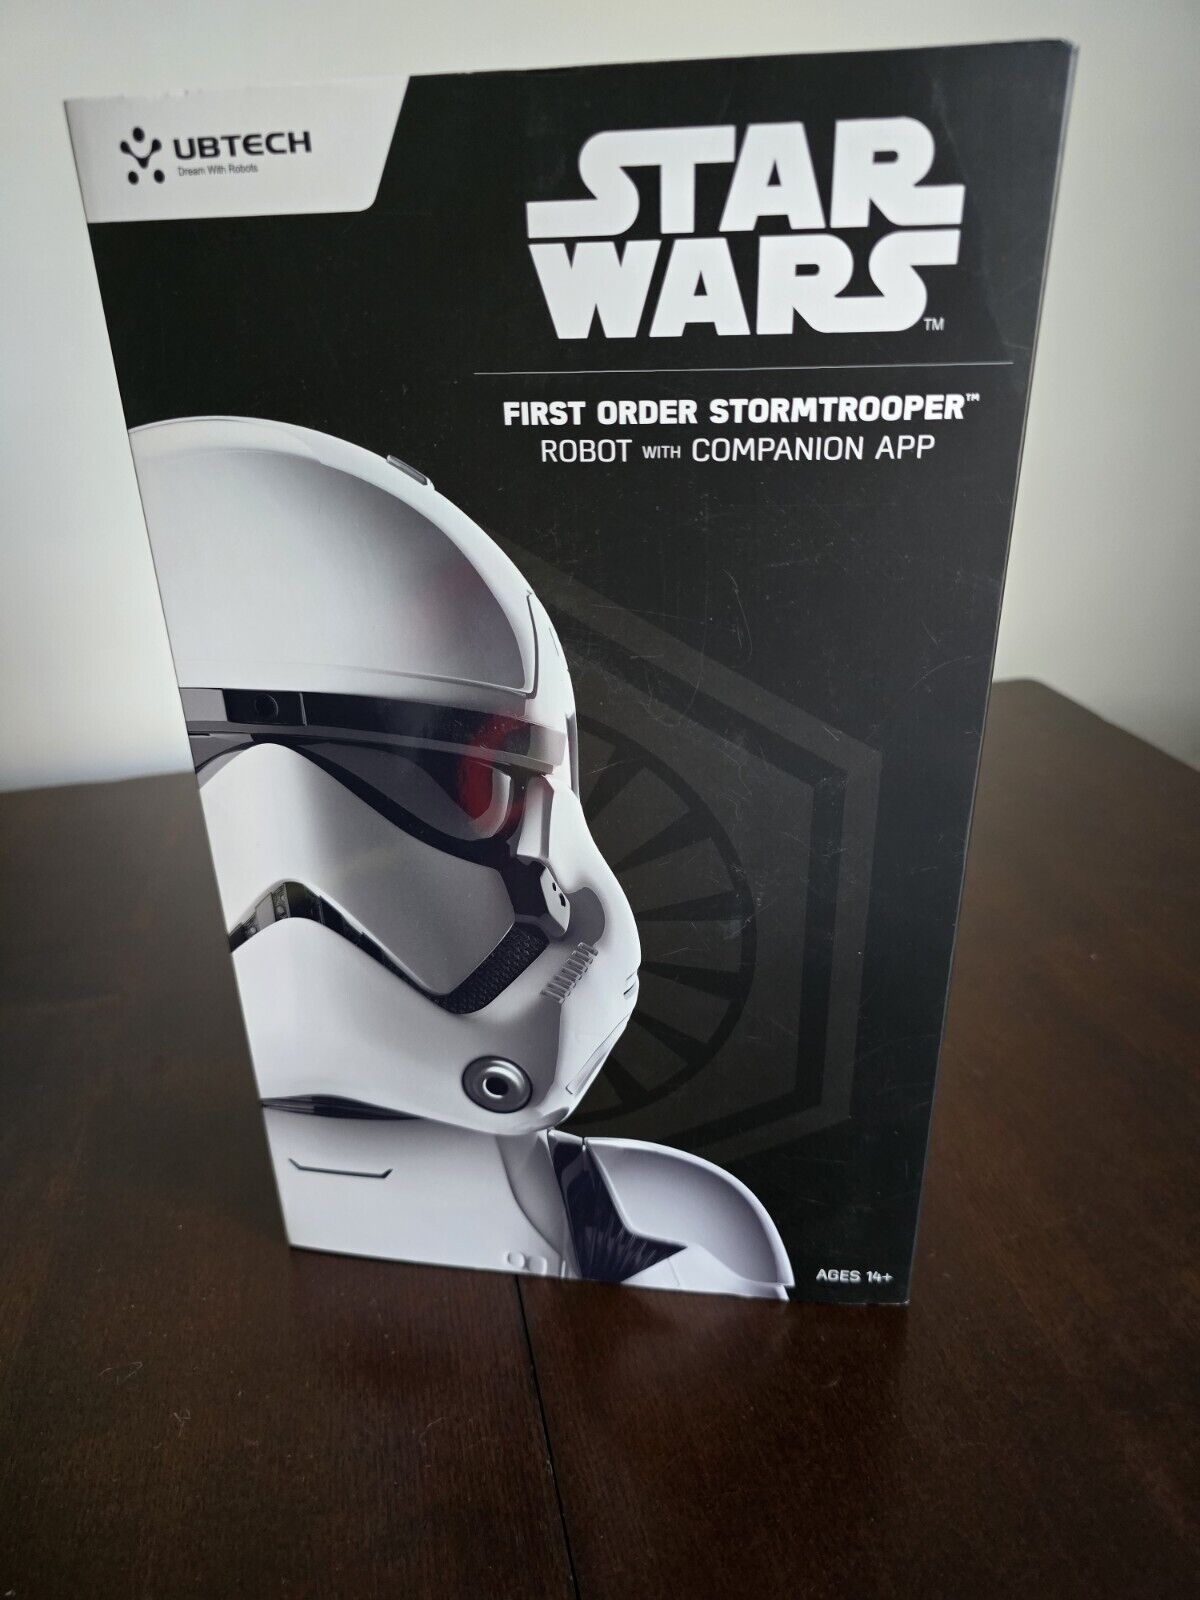 Star Wars Robot First Order Stormtrooper Ubtech with Comanion App New in Box